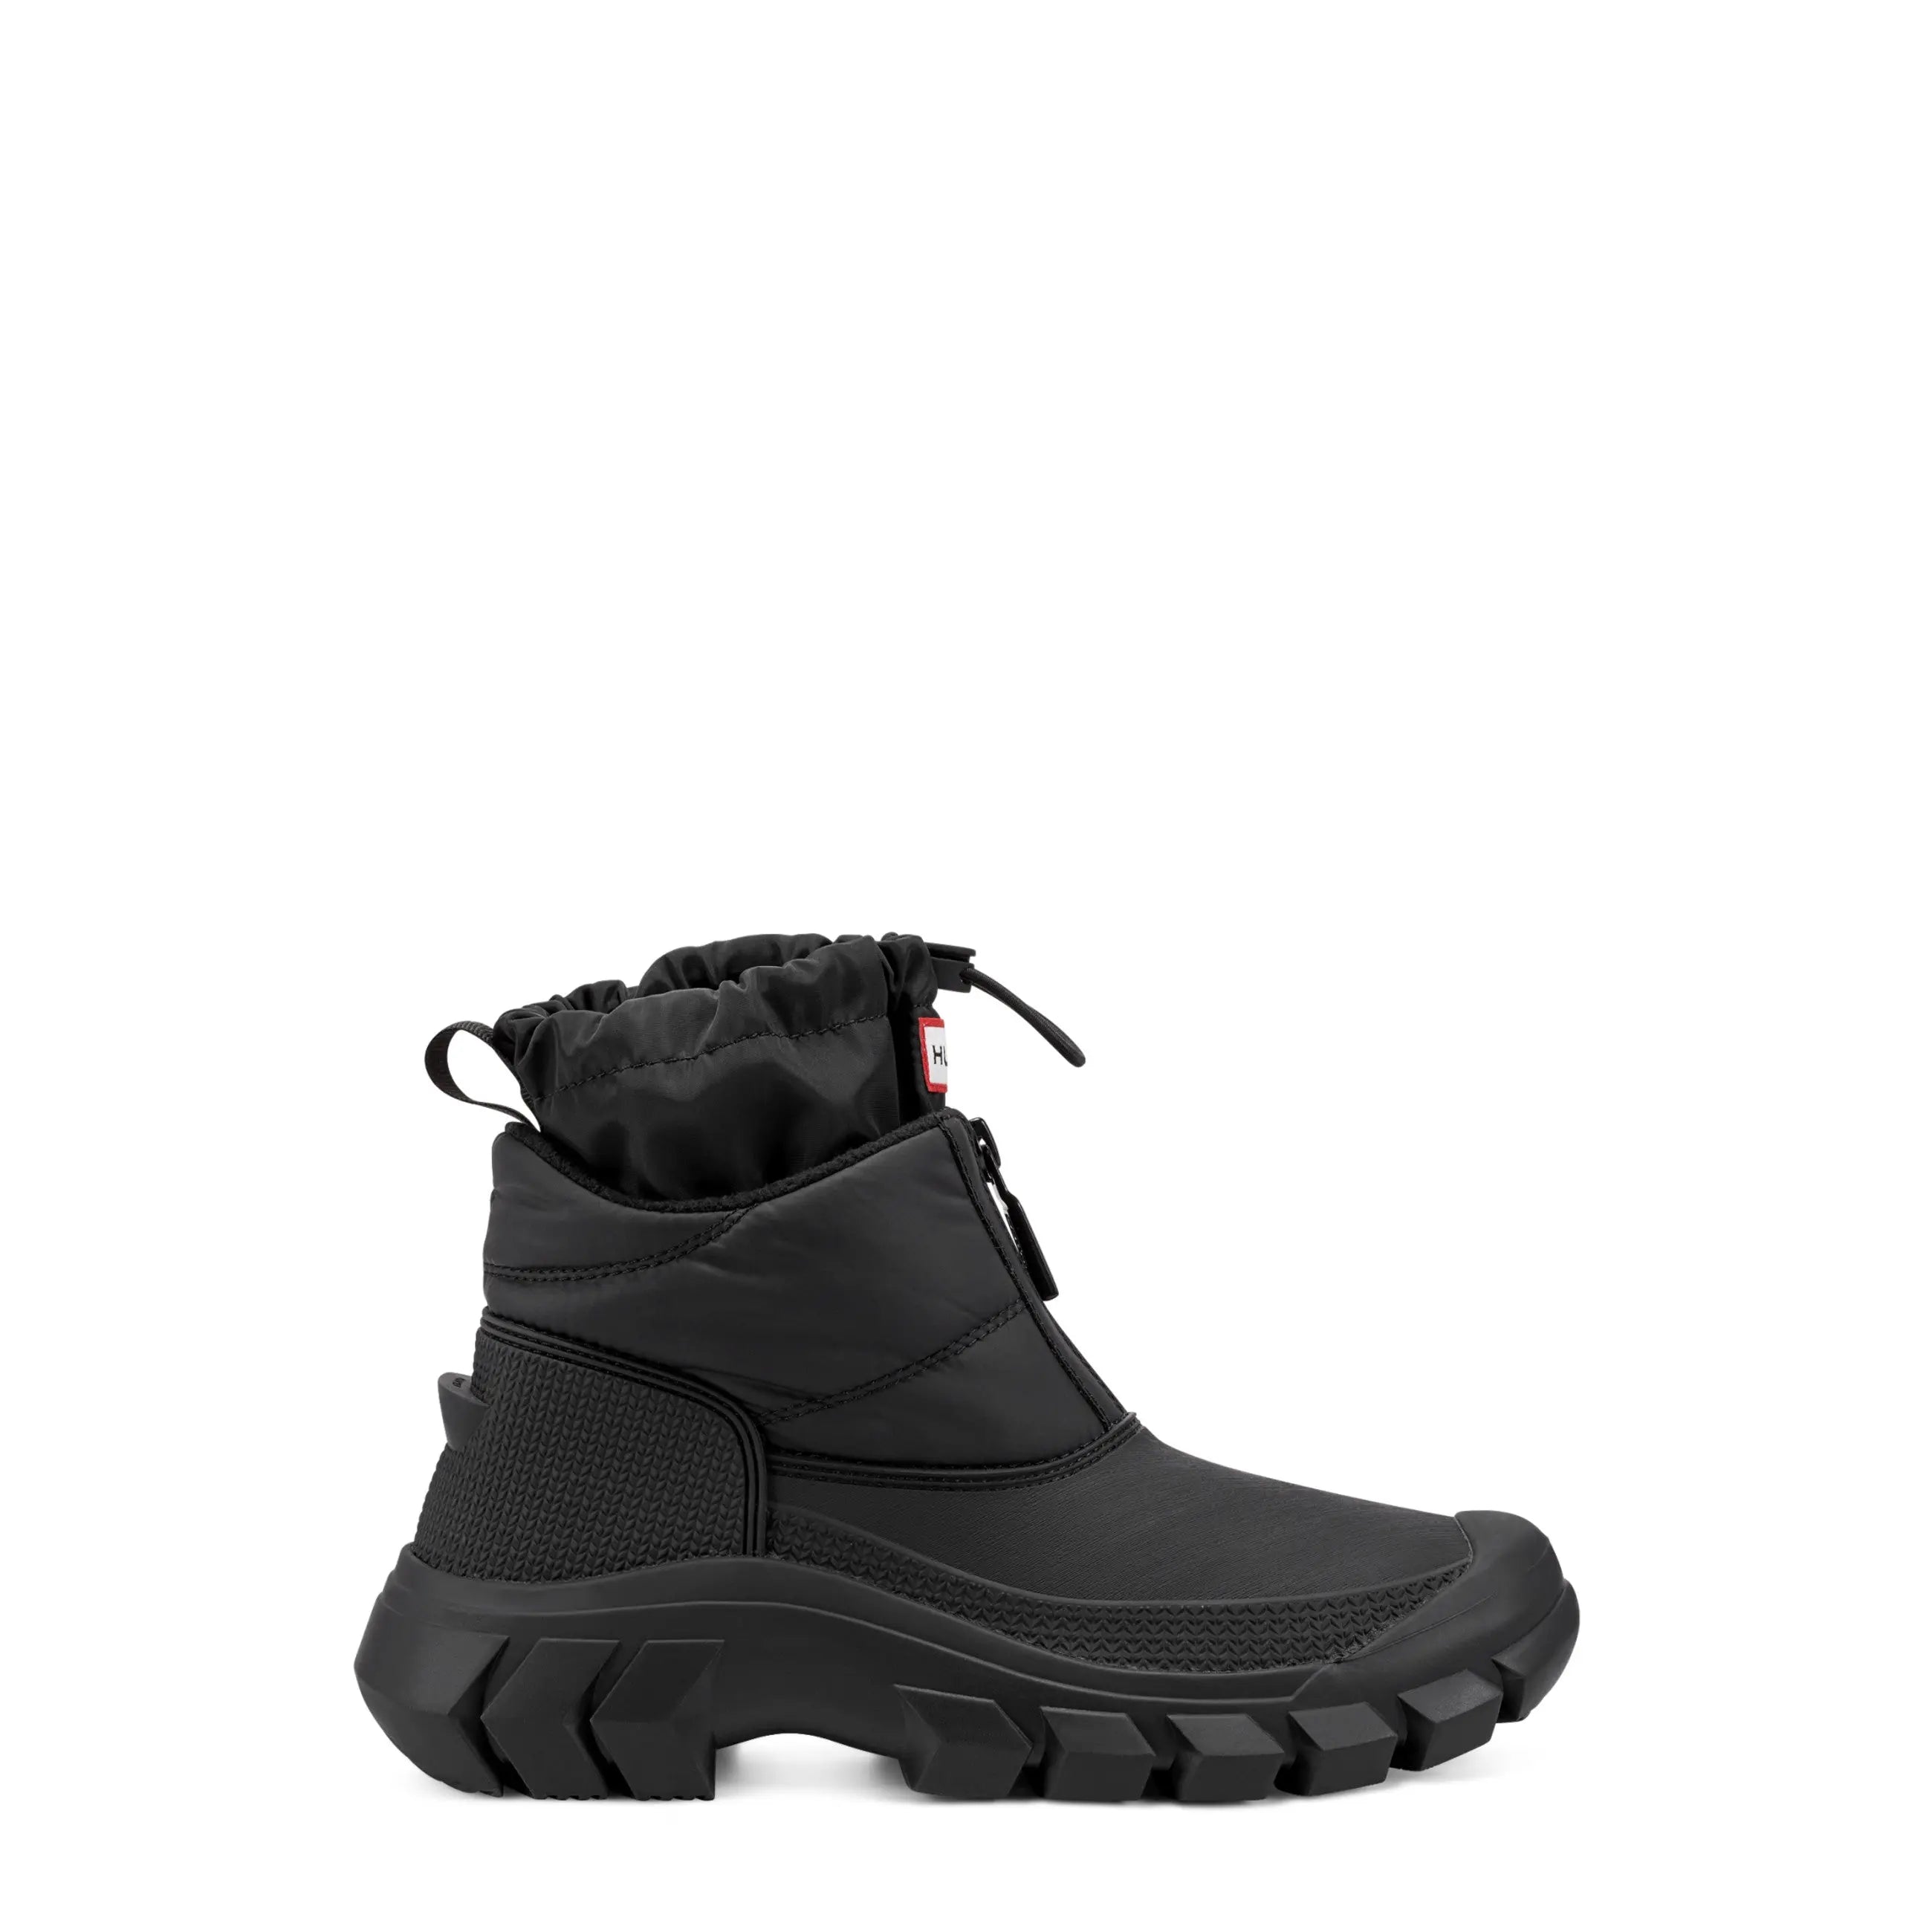 Women's Ankle Zip Snow Boots - Hunter Boots Women's Ankle Zip Snow Boots Black Hunter Boots Women's > Winter Footwear > Snow Boots